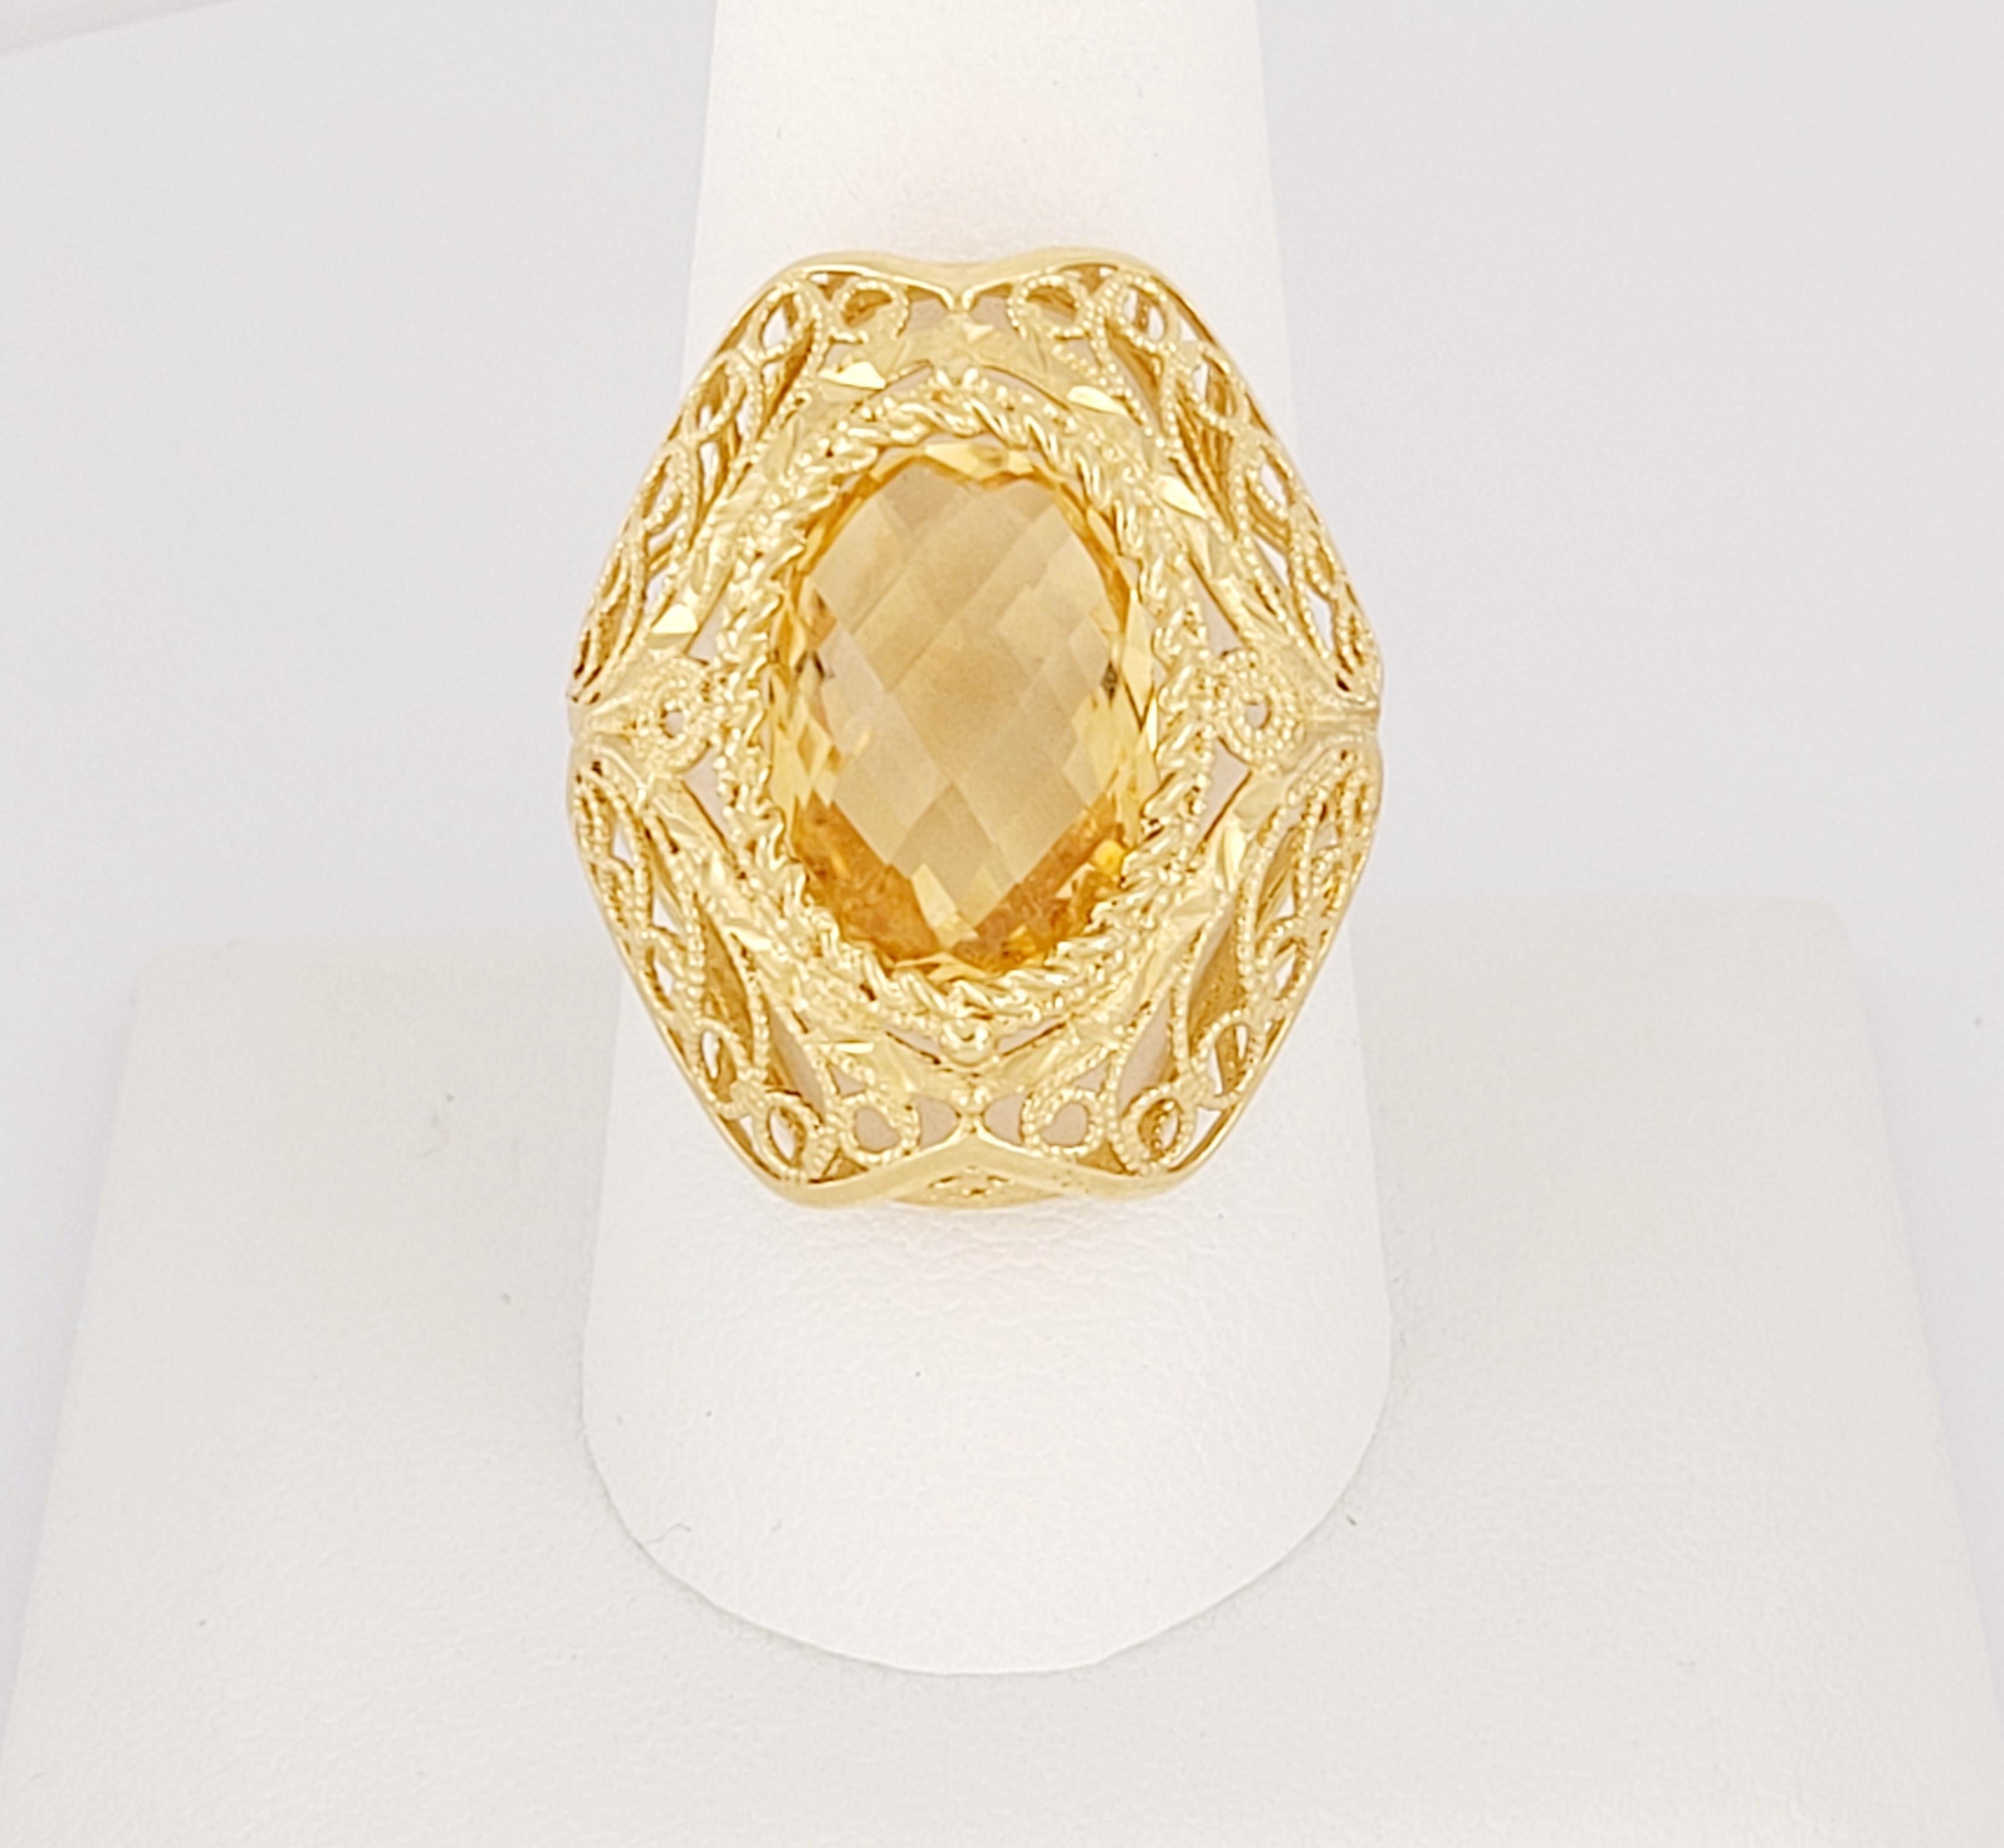 Vintage Ring
Material 18K Yellow Gold
Citrine Gemstone 
Gemstone 4.25ctw
Ring Size 9.75
Weight 6.3
Condition Excellent 
Retail Price$ 2.900